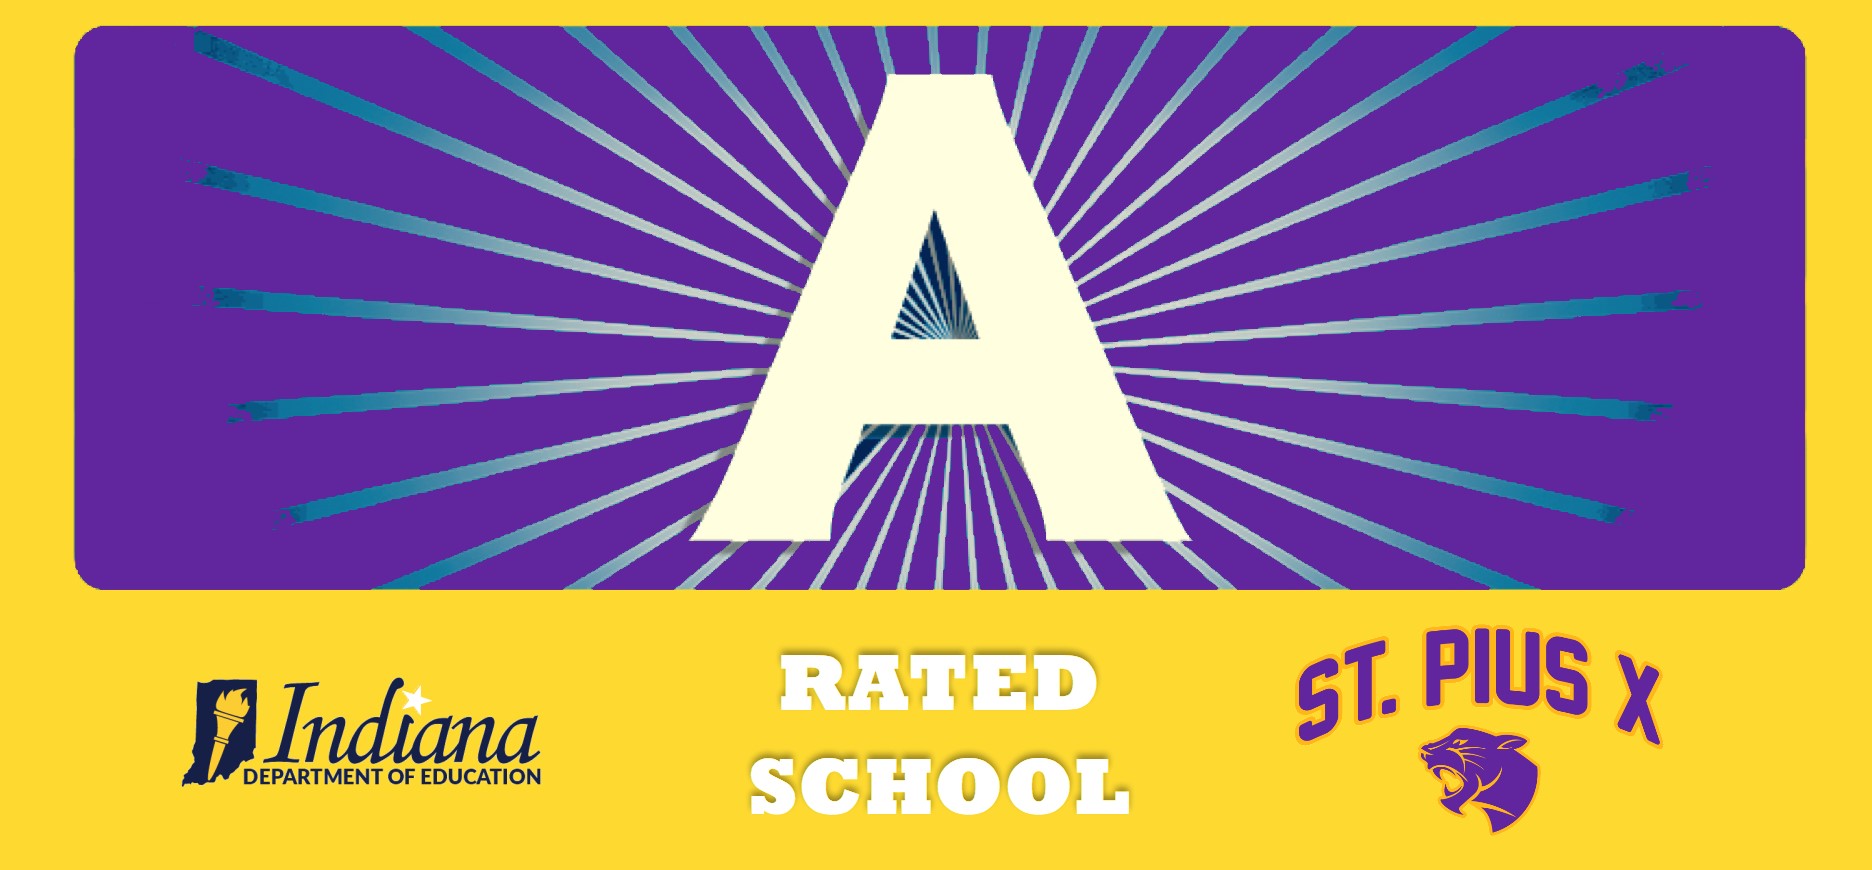 A Rated School Logo